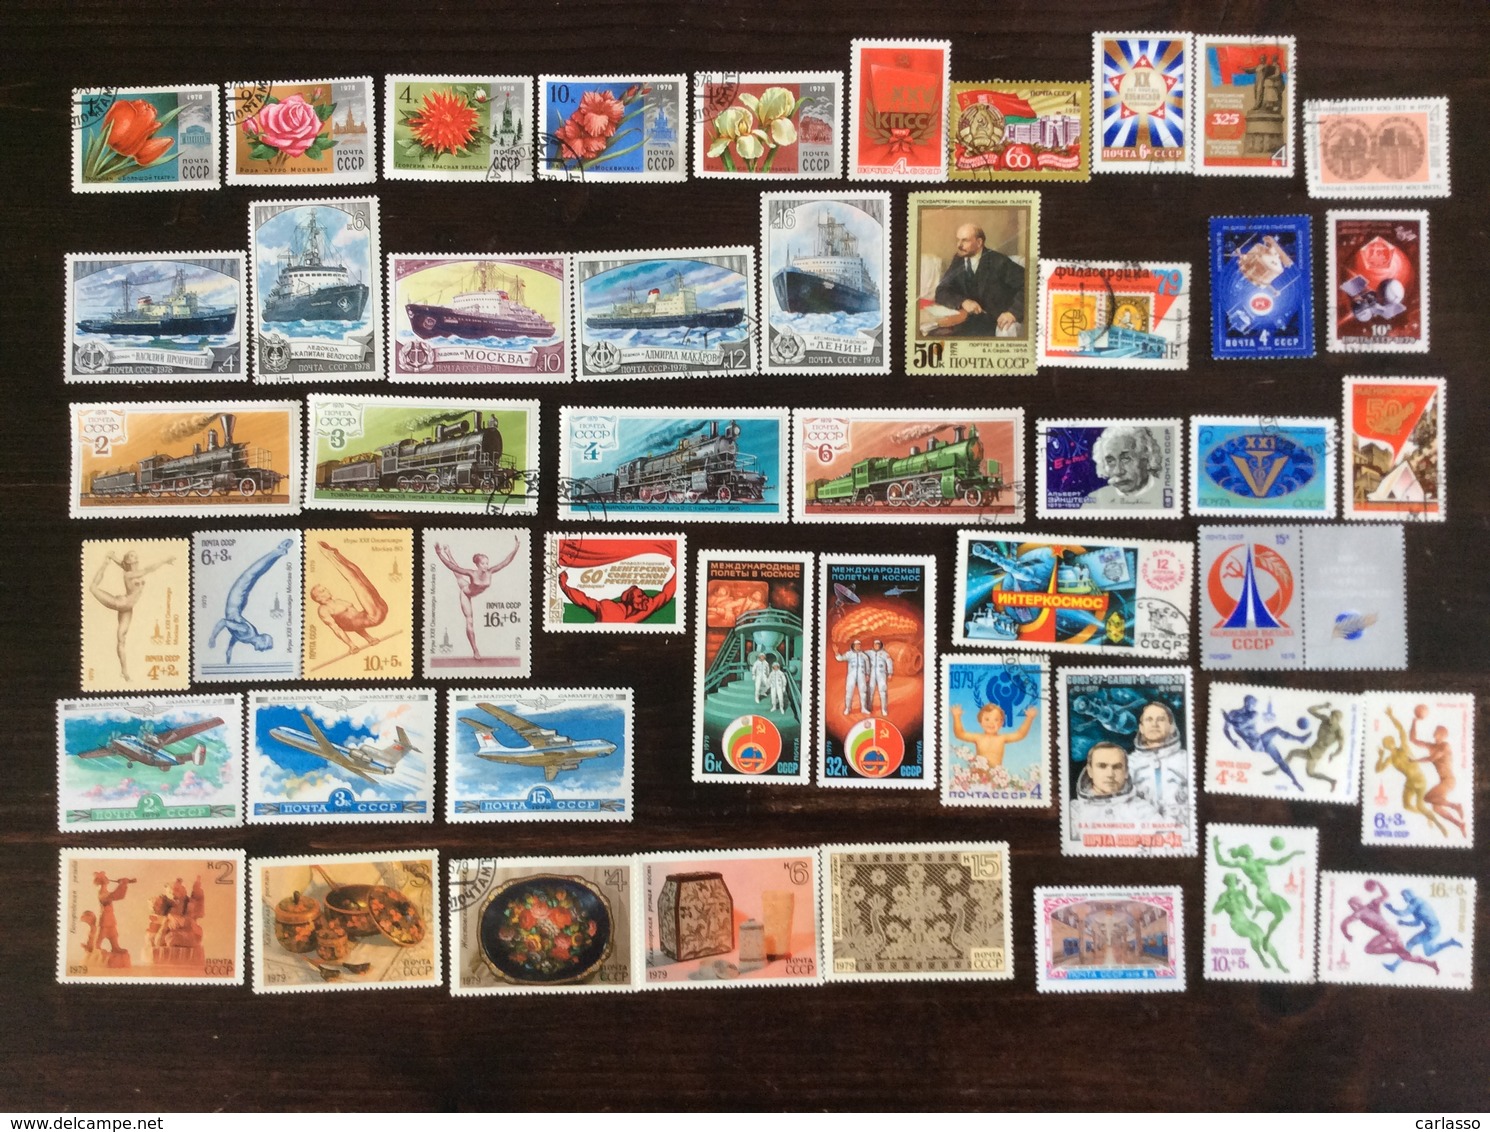 USSR - 100 complete sets + other loose stamps for a total of over 1120 all different.